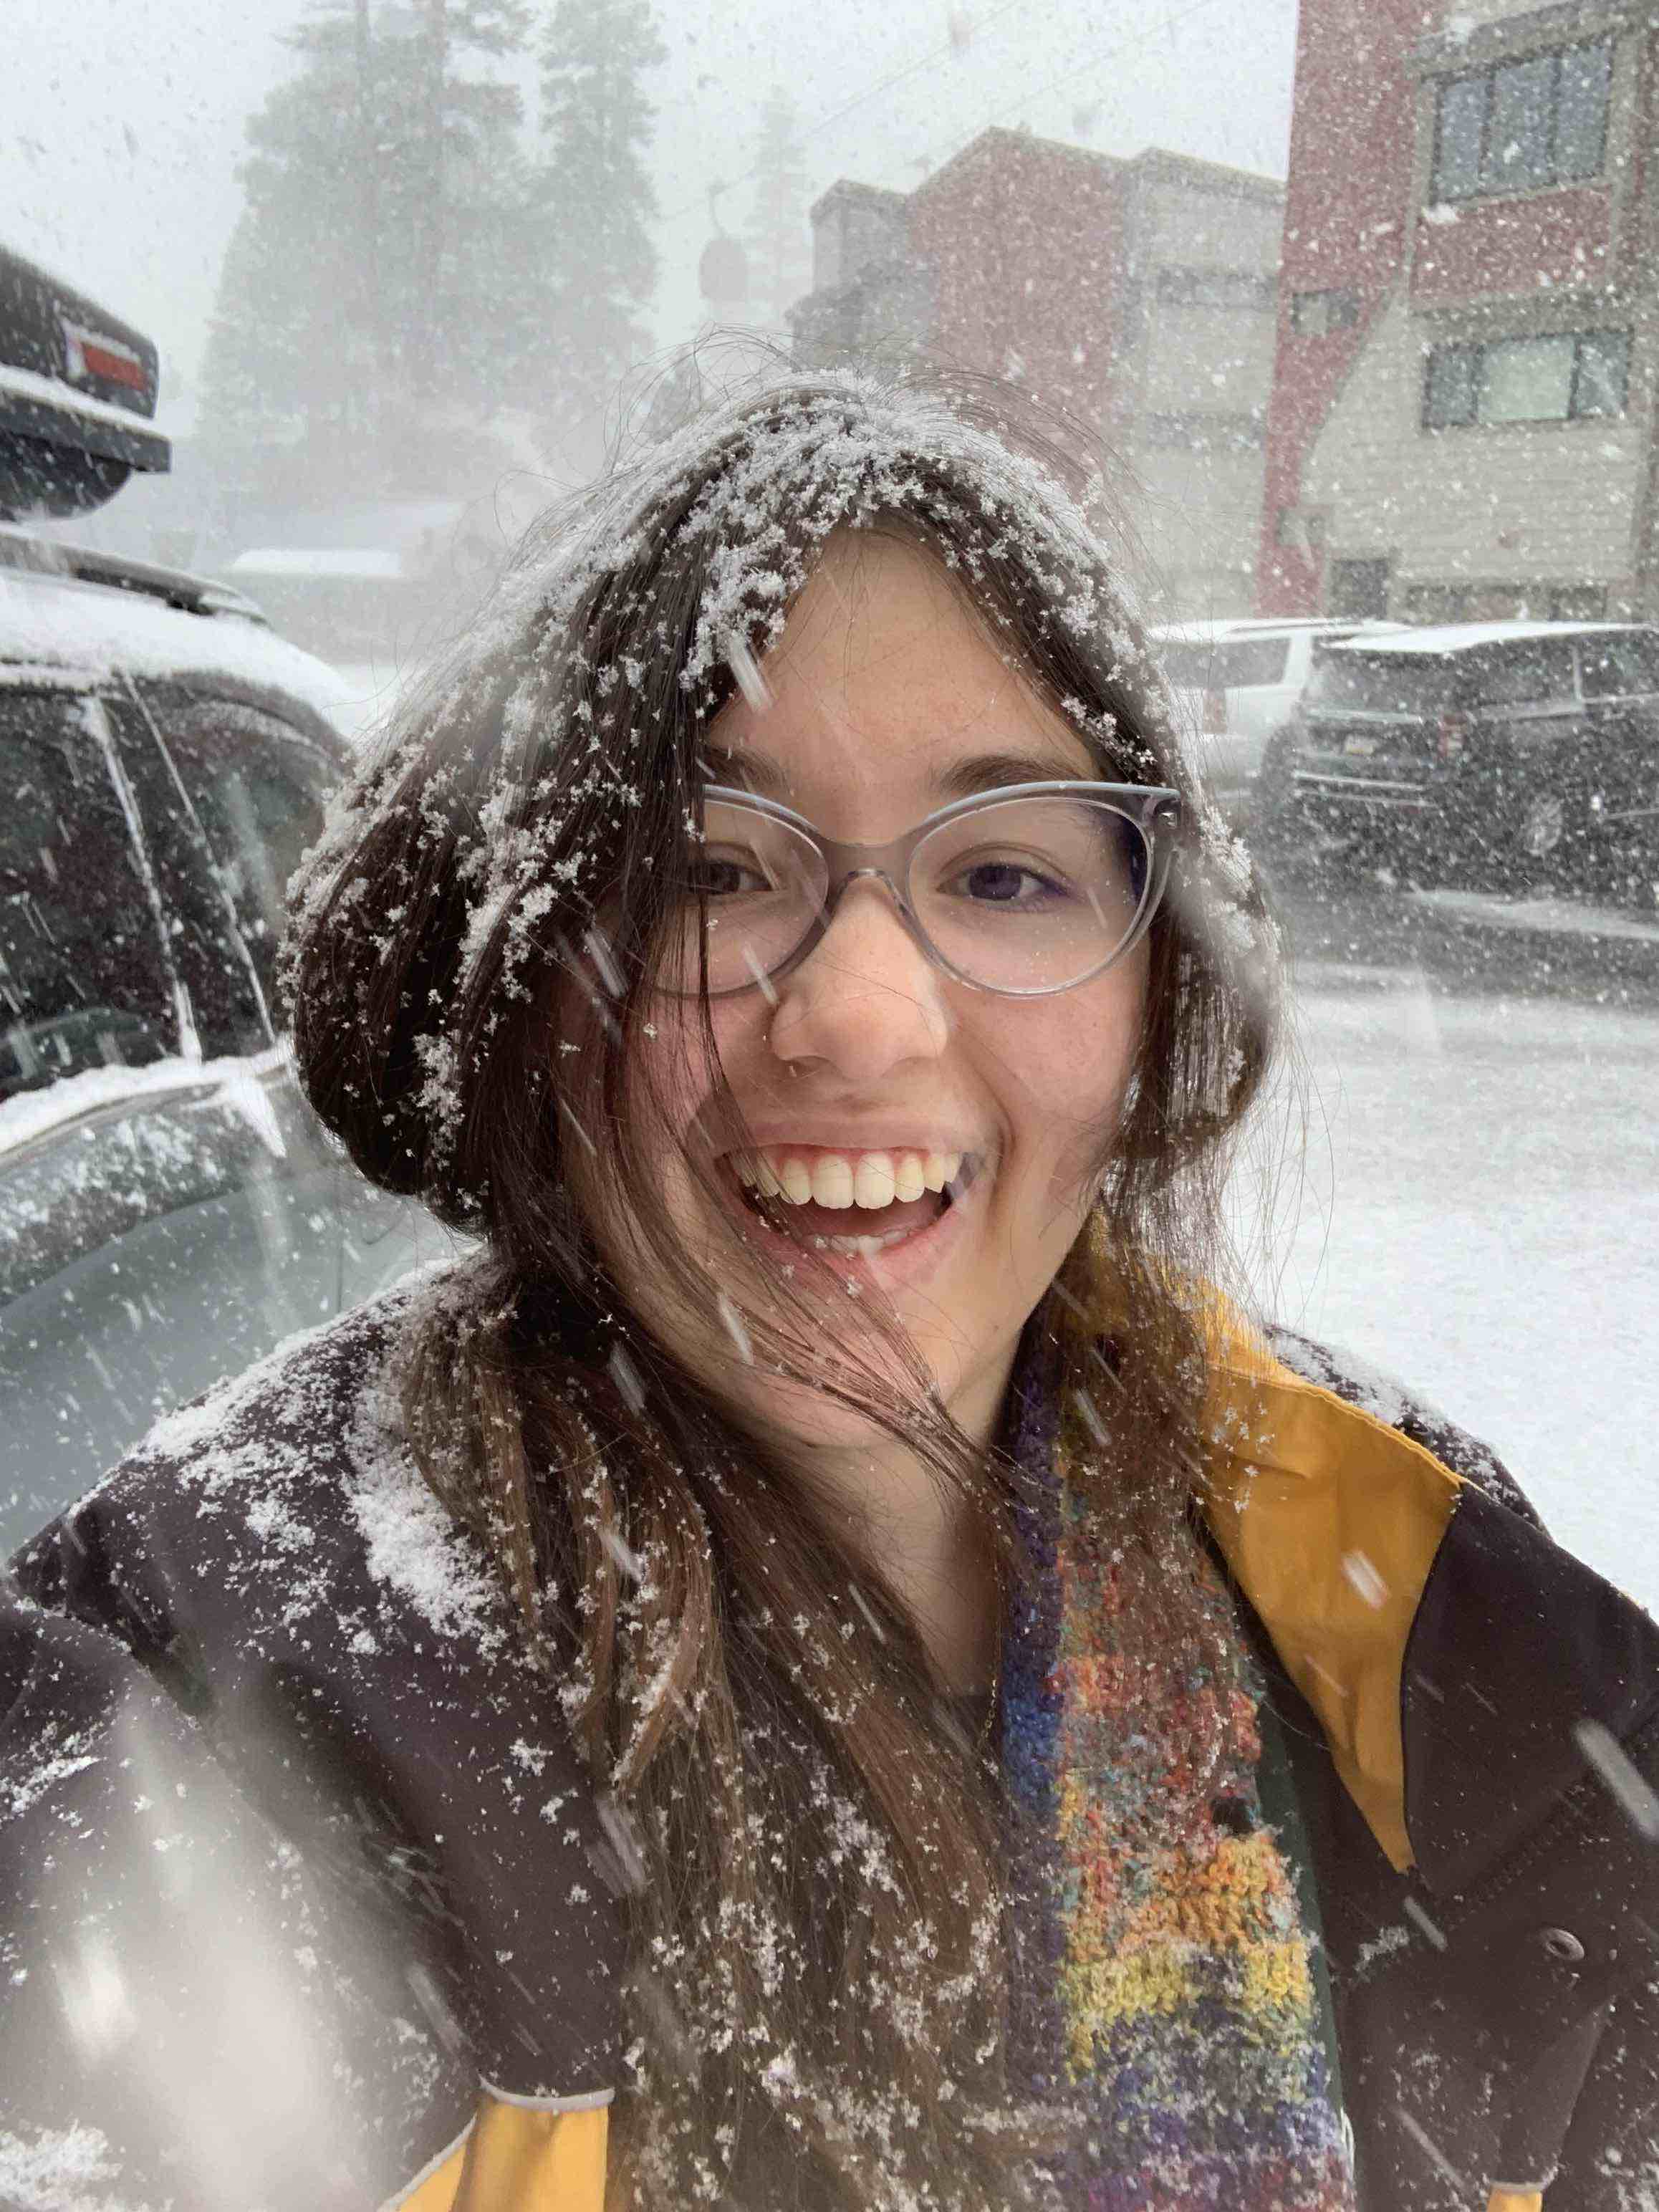 Clarissa Lesky, a young woman with long brown hair, standing outside as snow is falling down around her